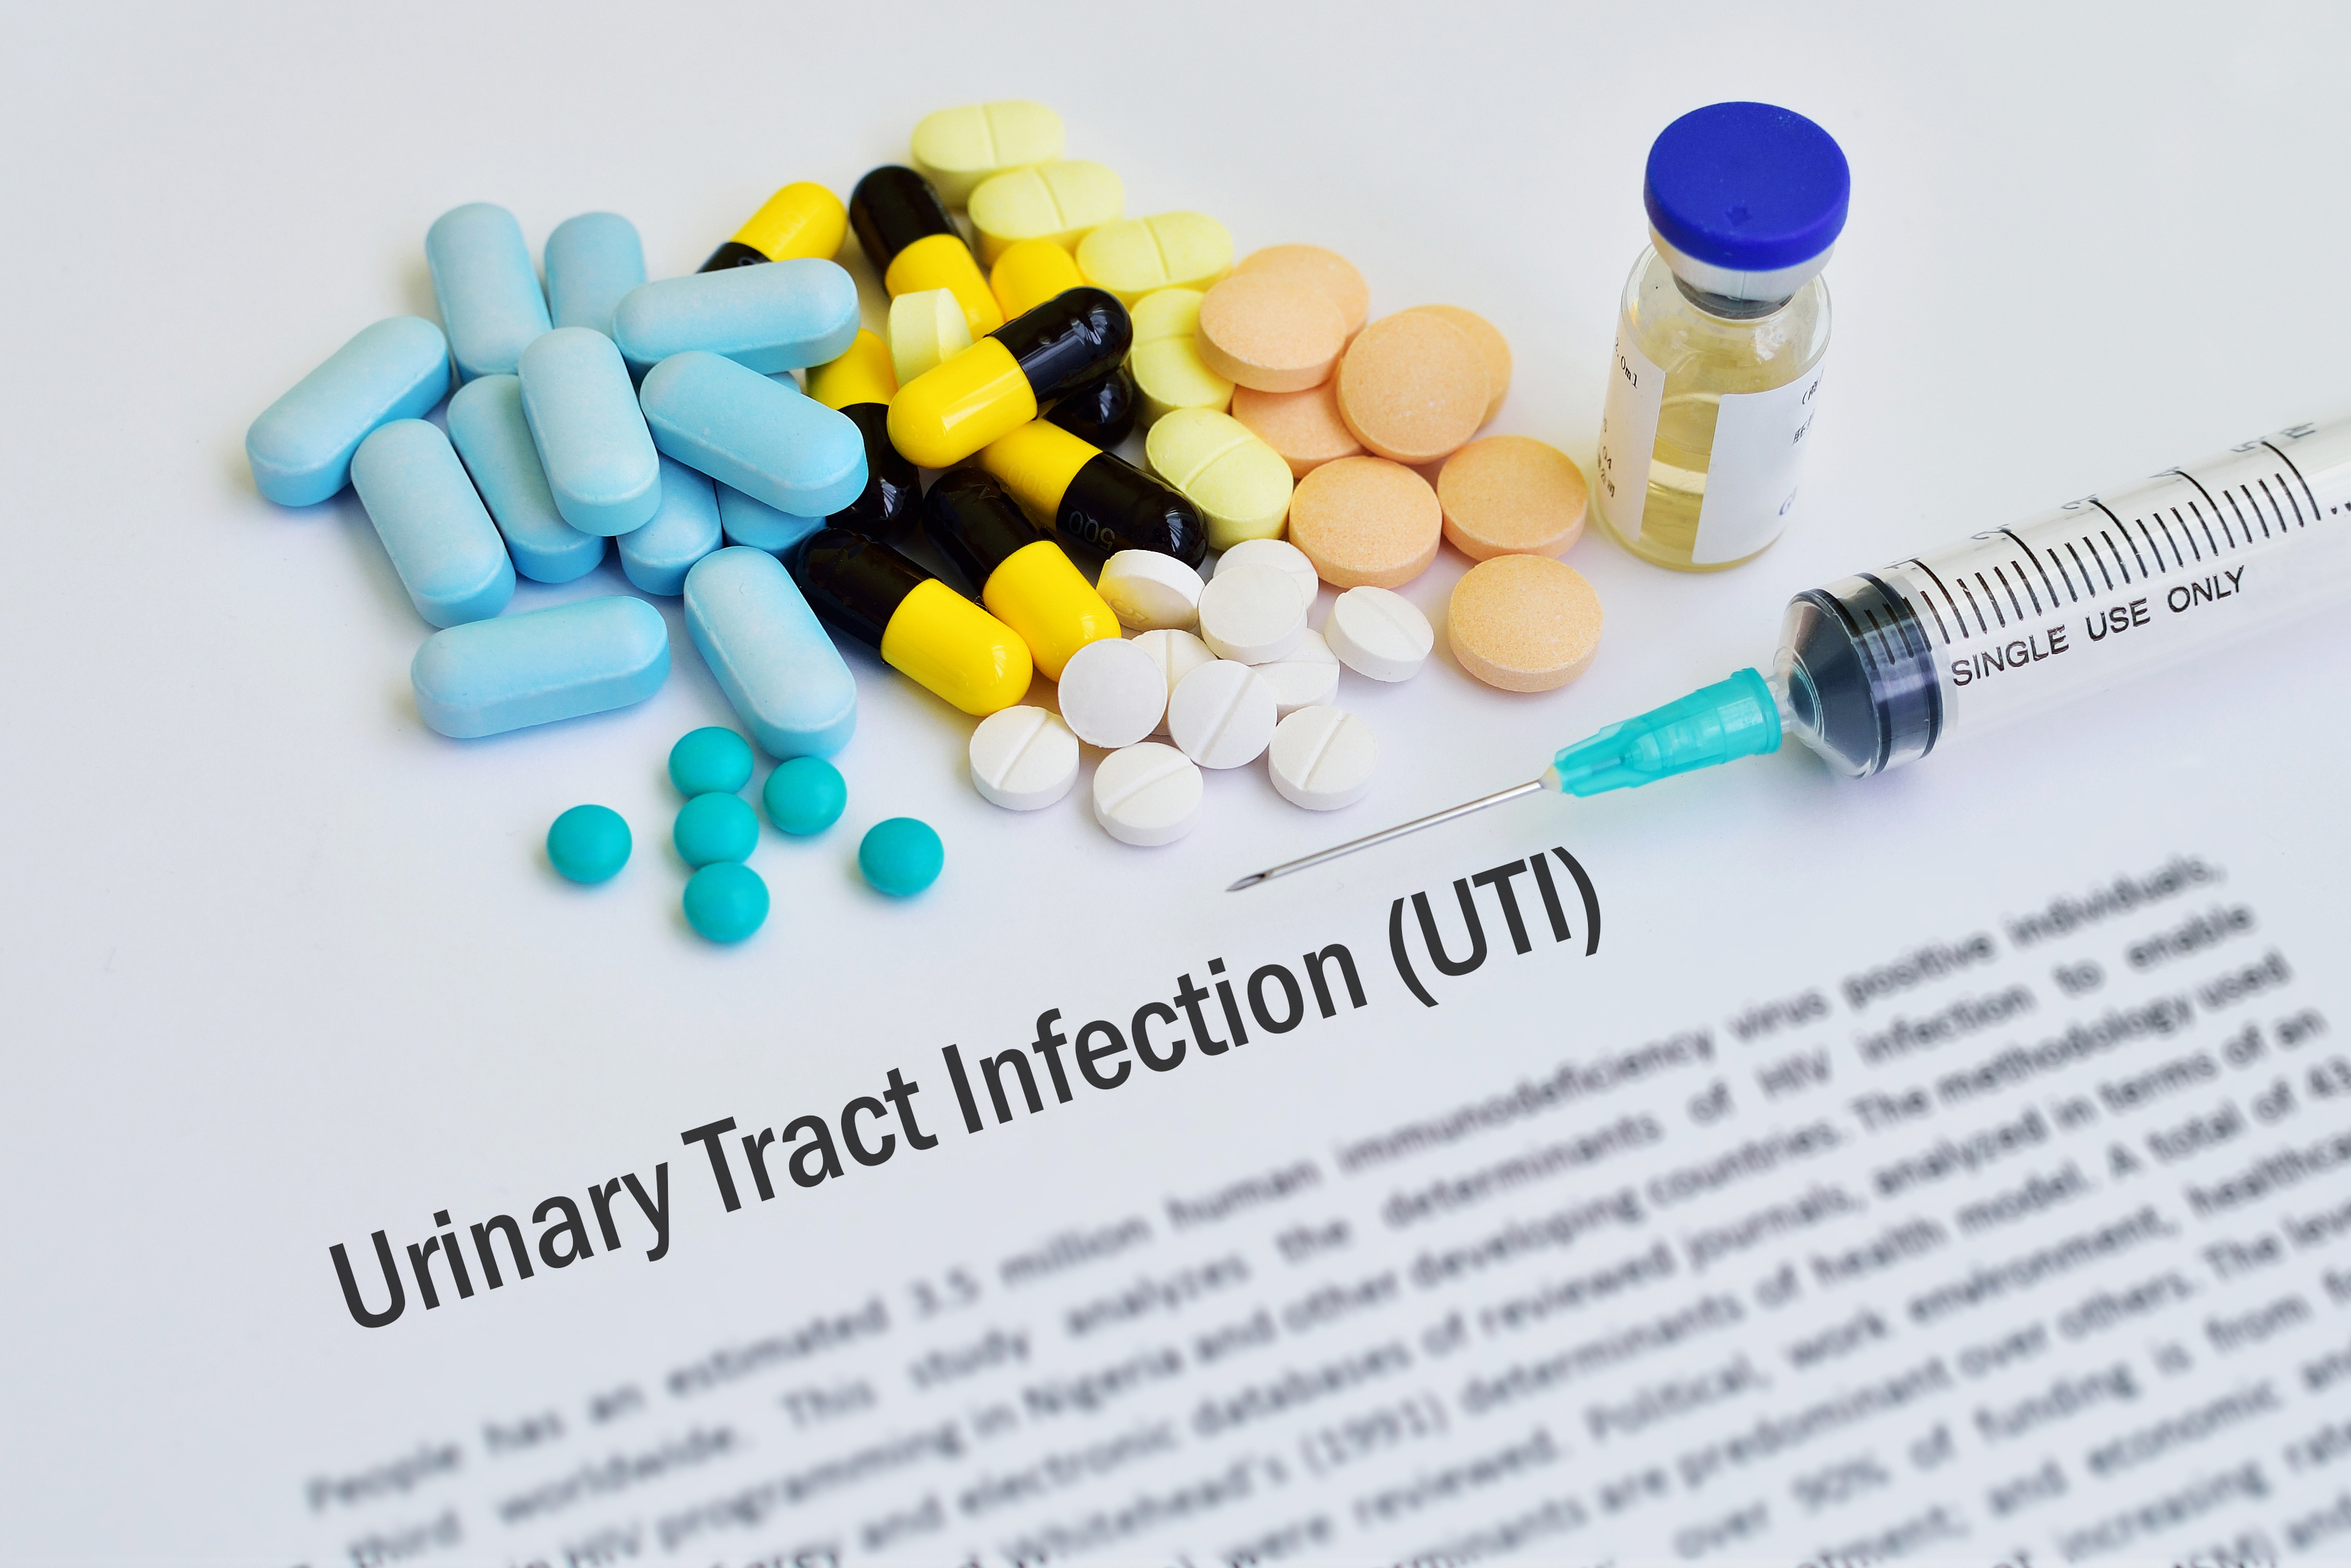 Urinary tract infection: Definition, symptoms, and treatment